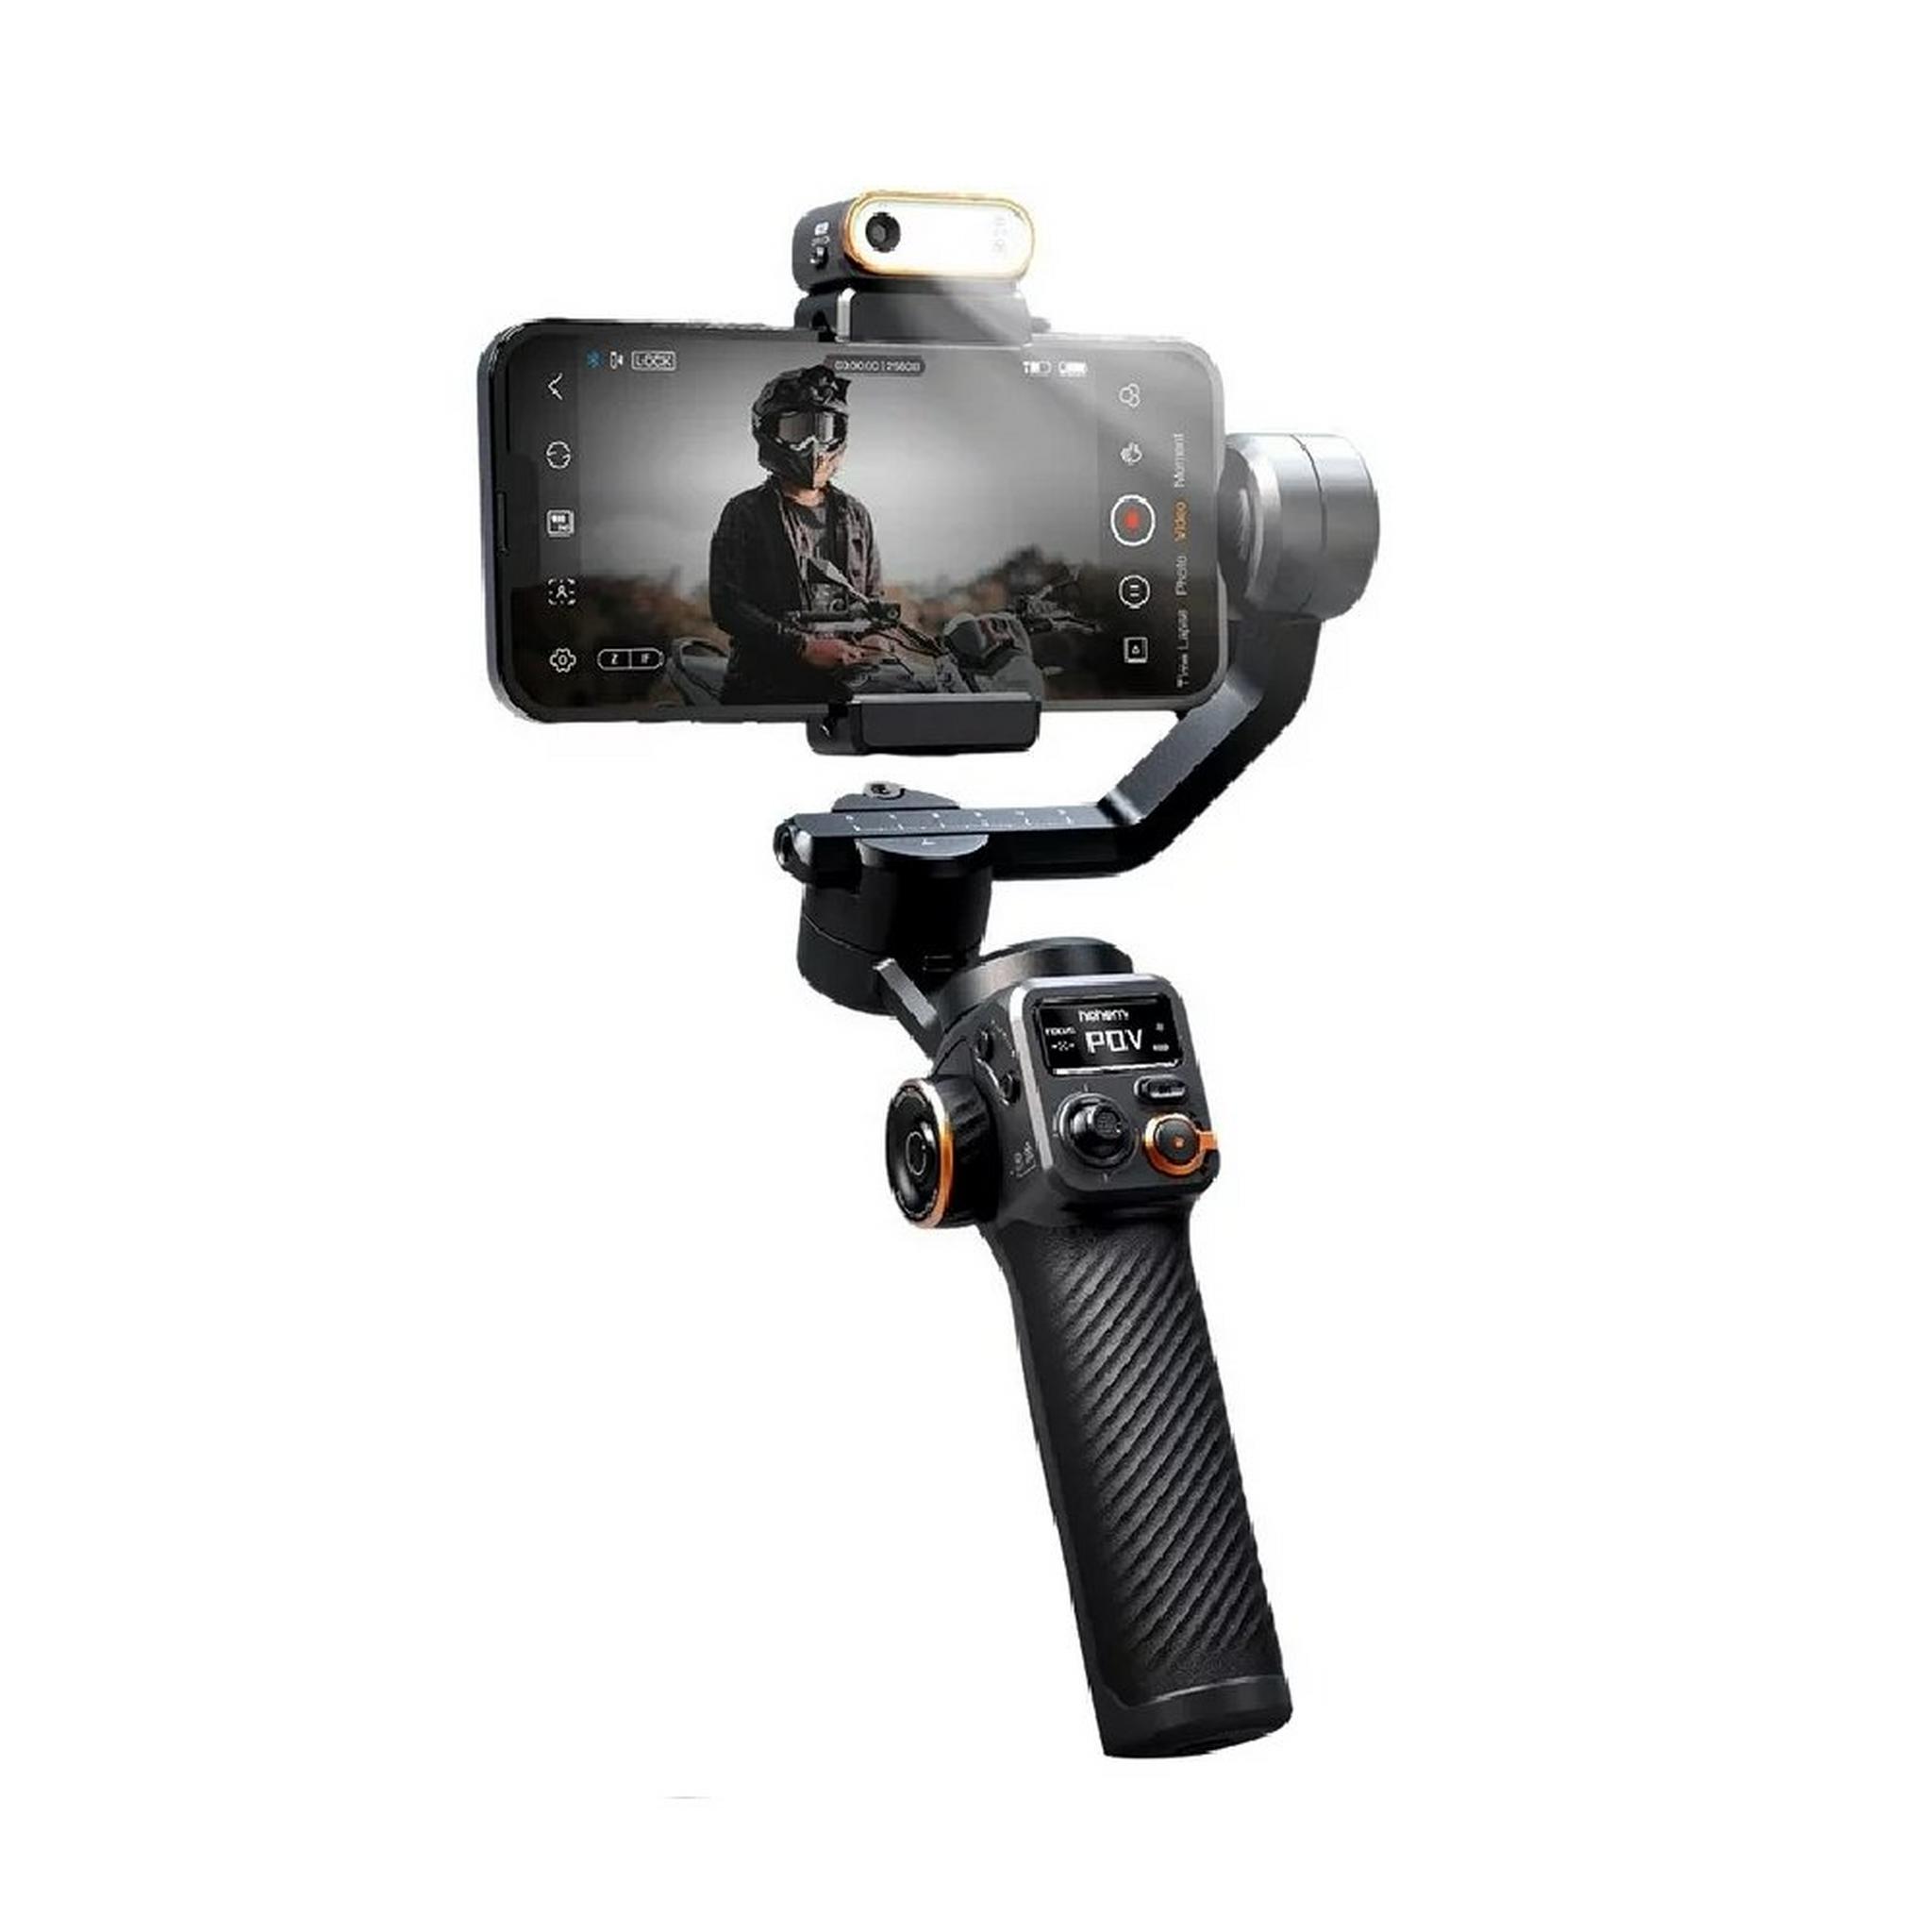 Hohem iSteady M6 Kit Handheld Gimbal 3-Axis Stabilizer For Smartphones, Black